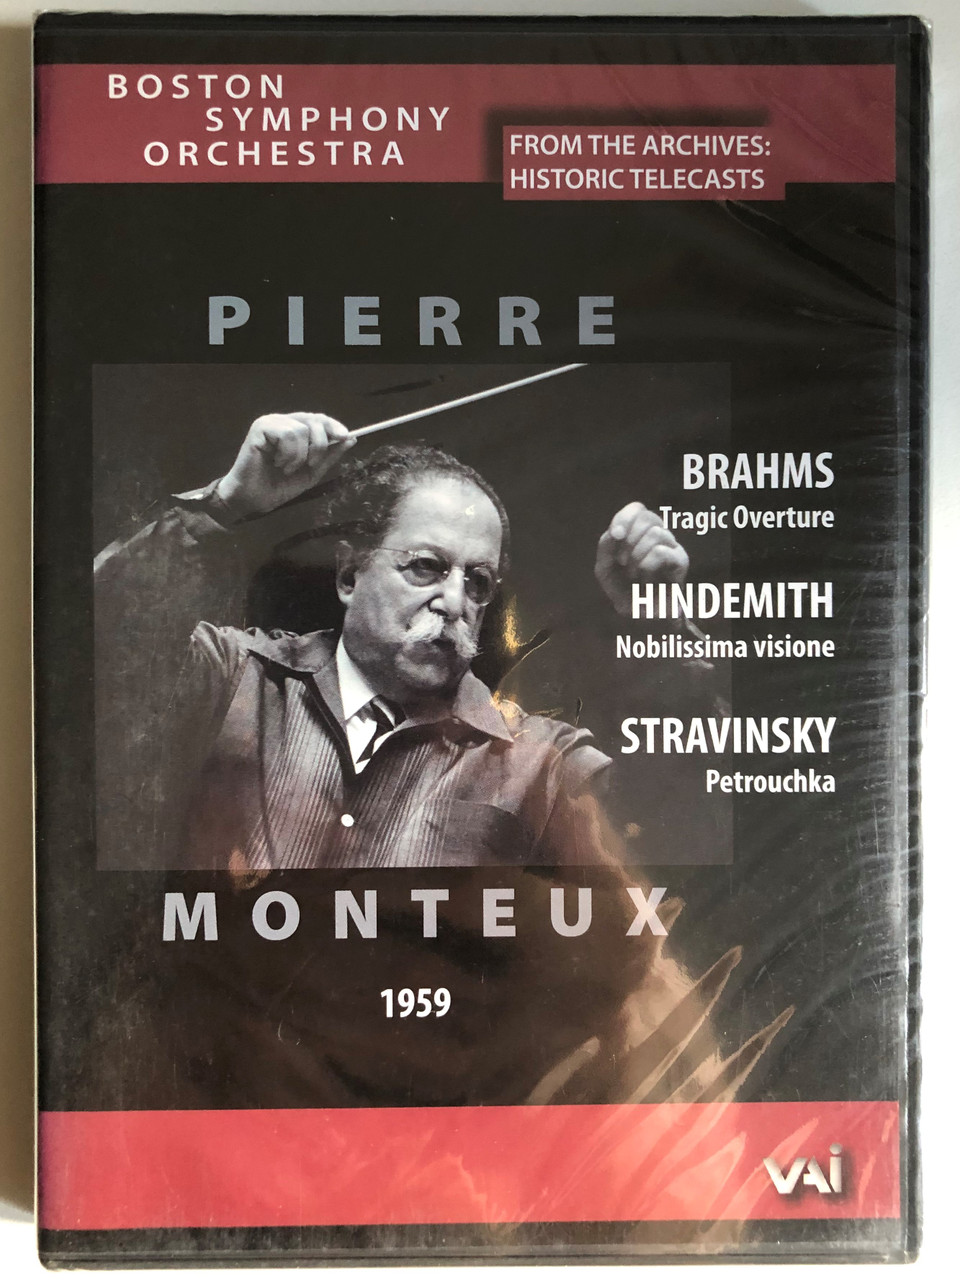 Brahms_Hindemith_Stravinsky_Pierre_Monteux_Boston_Symphony_Orchestra_Conductor_Pierre_Monteux_FROM_THE_ARCHIVES_HISTORIC_TELECASTS_AWGBH_Live_Telecast_from_Sanders_Theatre___34035.1691730011.1280.1280.JPG (960×1280)